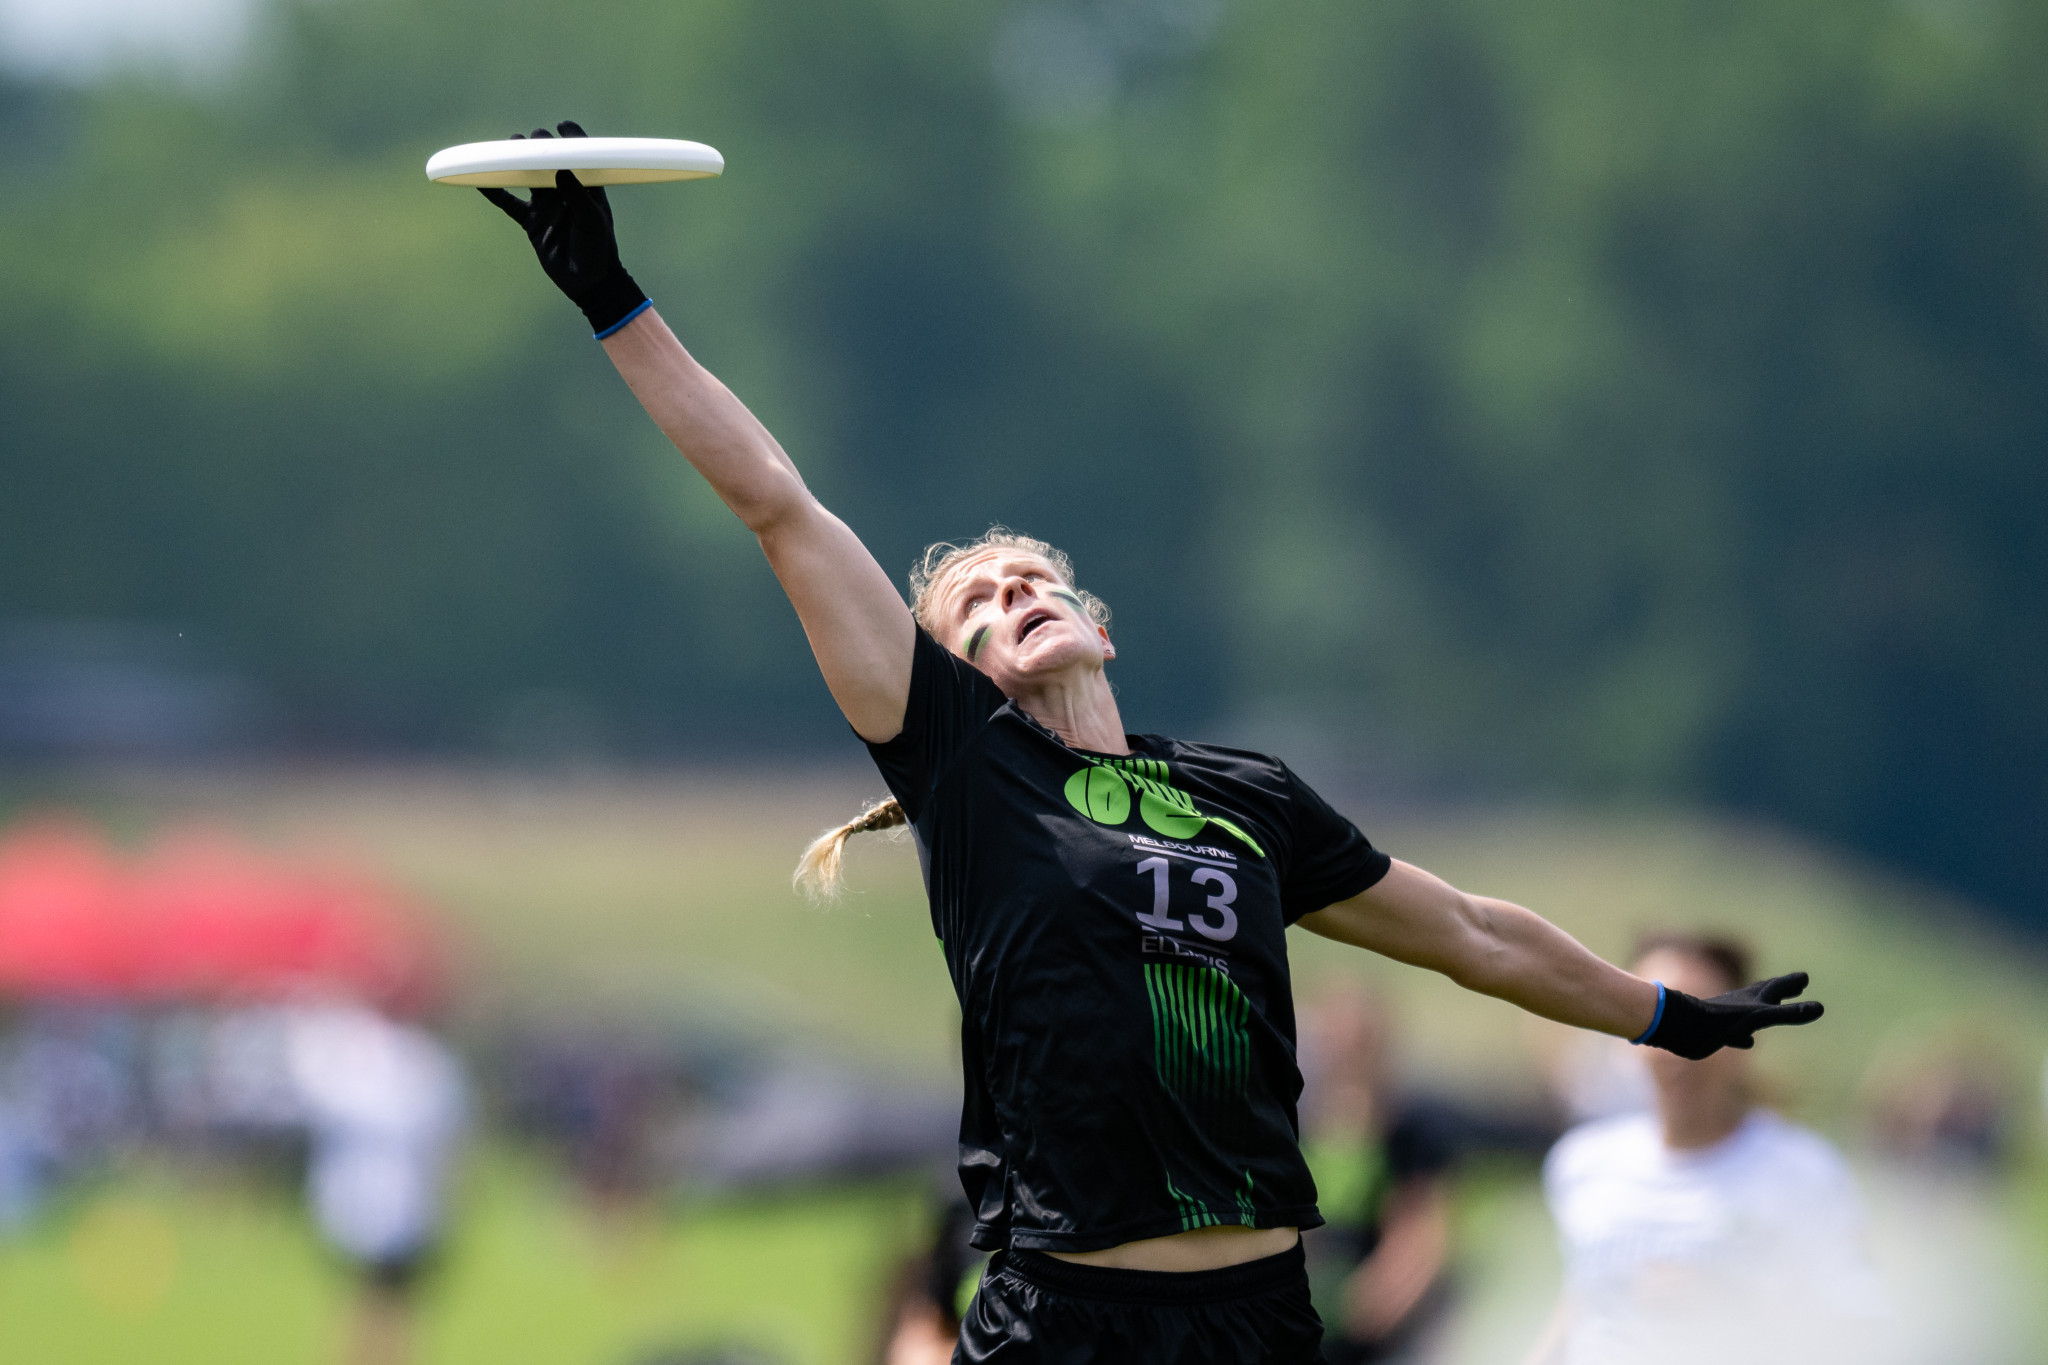 Marah Neal helped Ellipsis to four successive wins in Pool F ©Samuel Hotaling for UltiPhotos